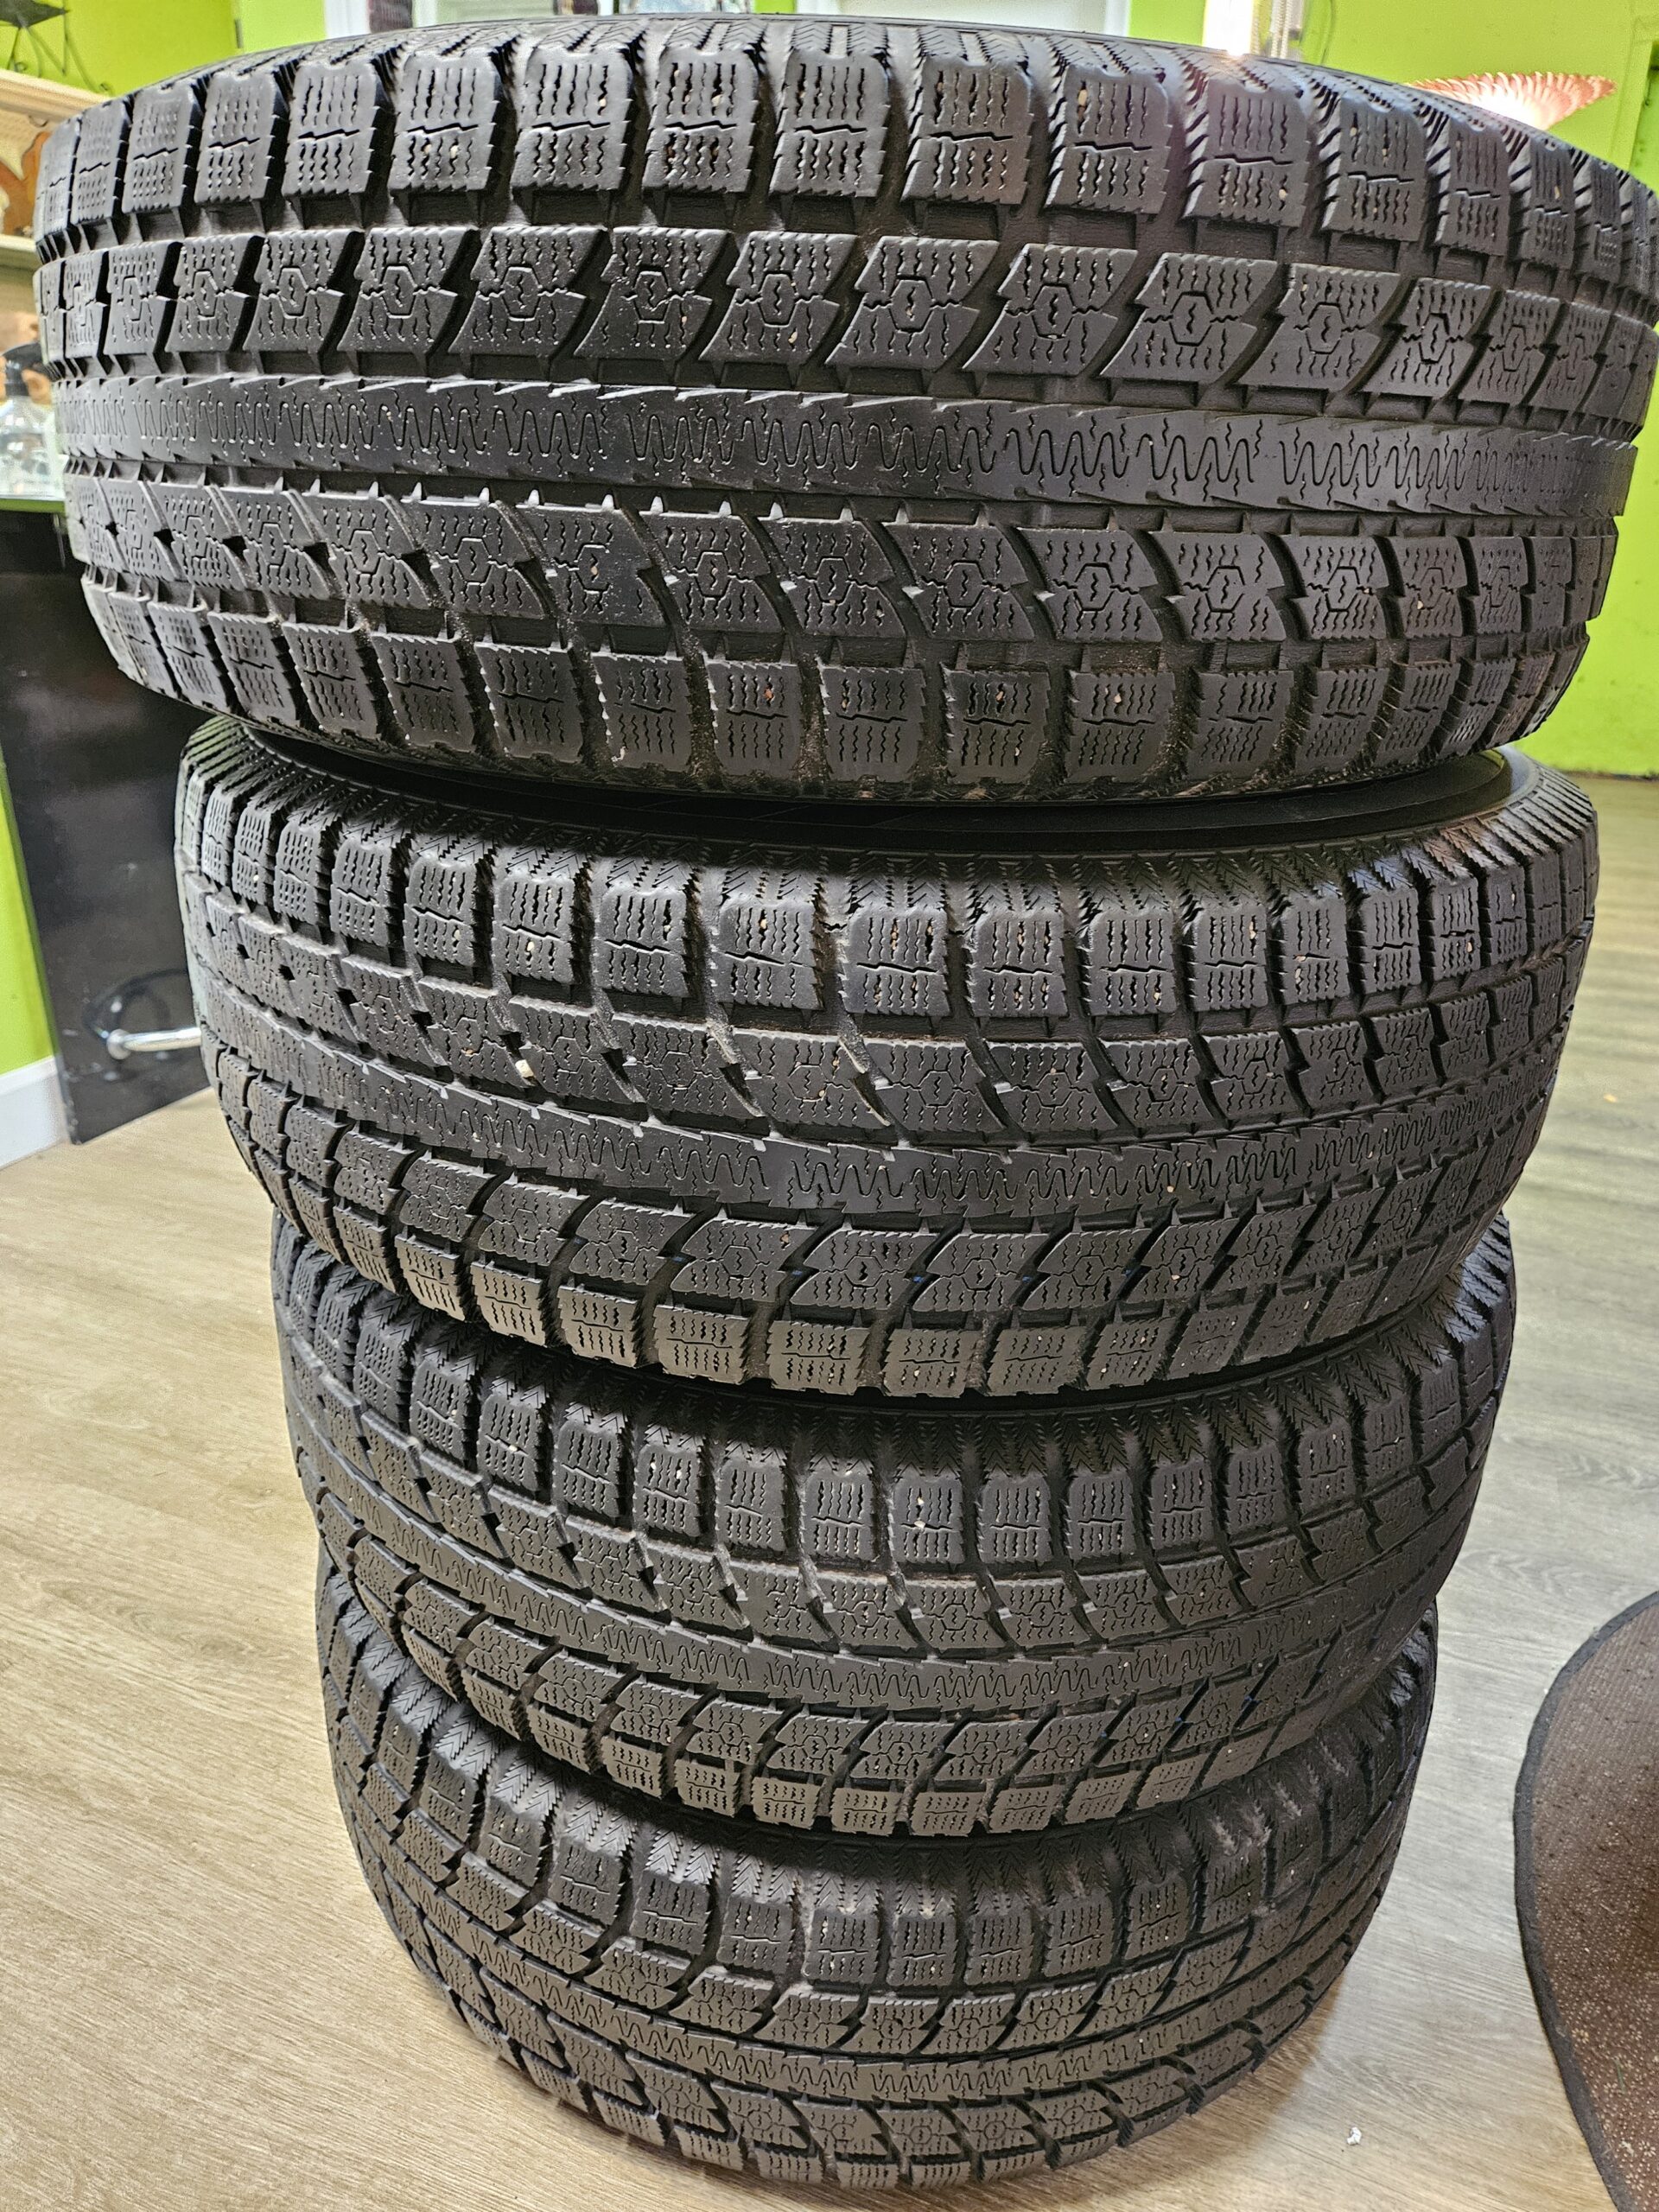 265/70R18 Toyo Snow Tires on Ford F150 Rims